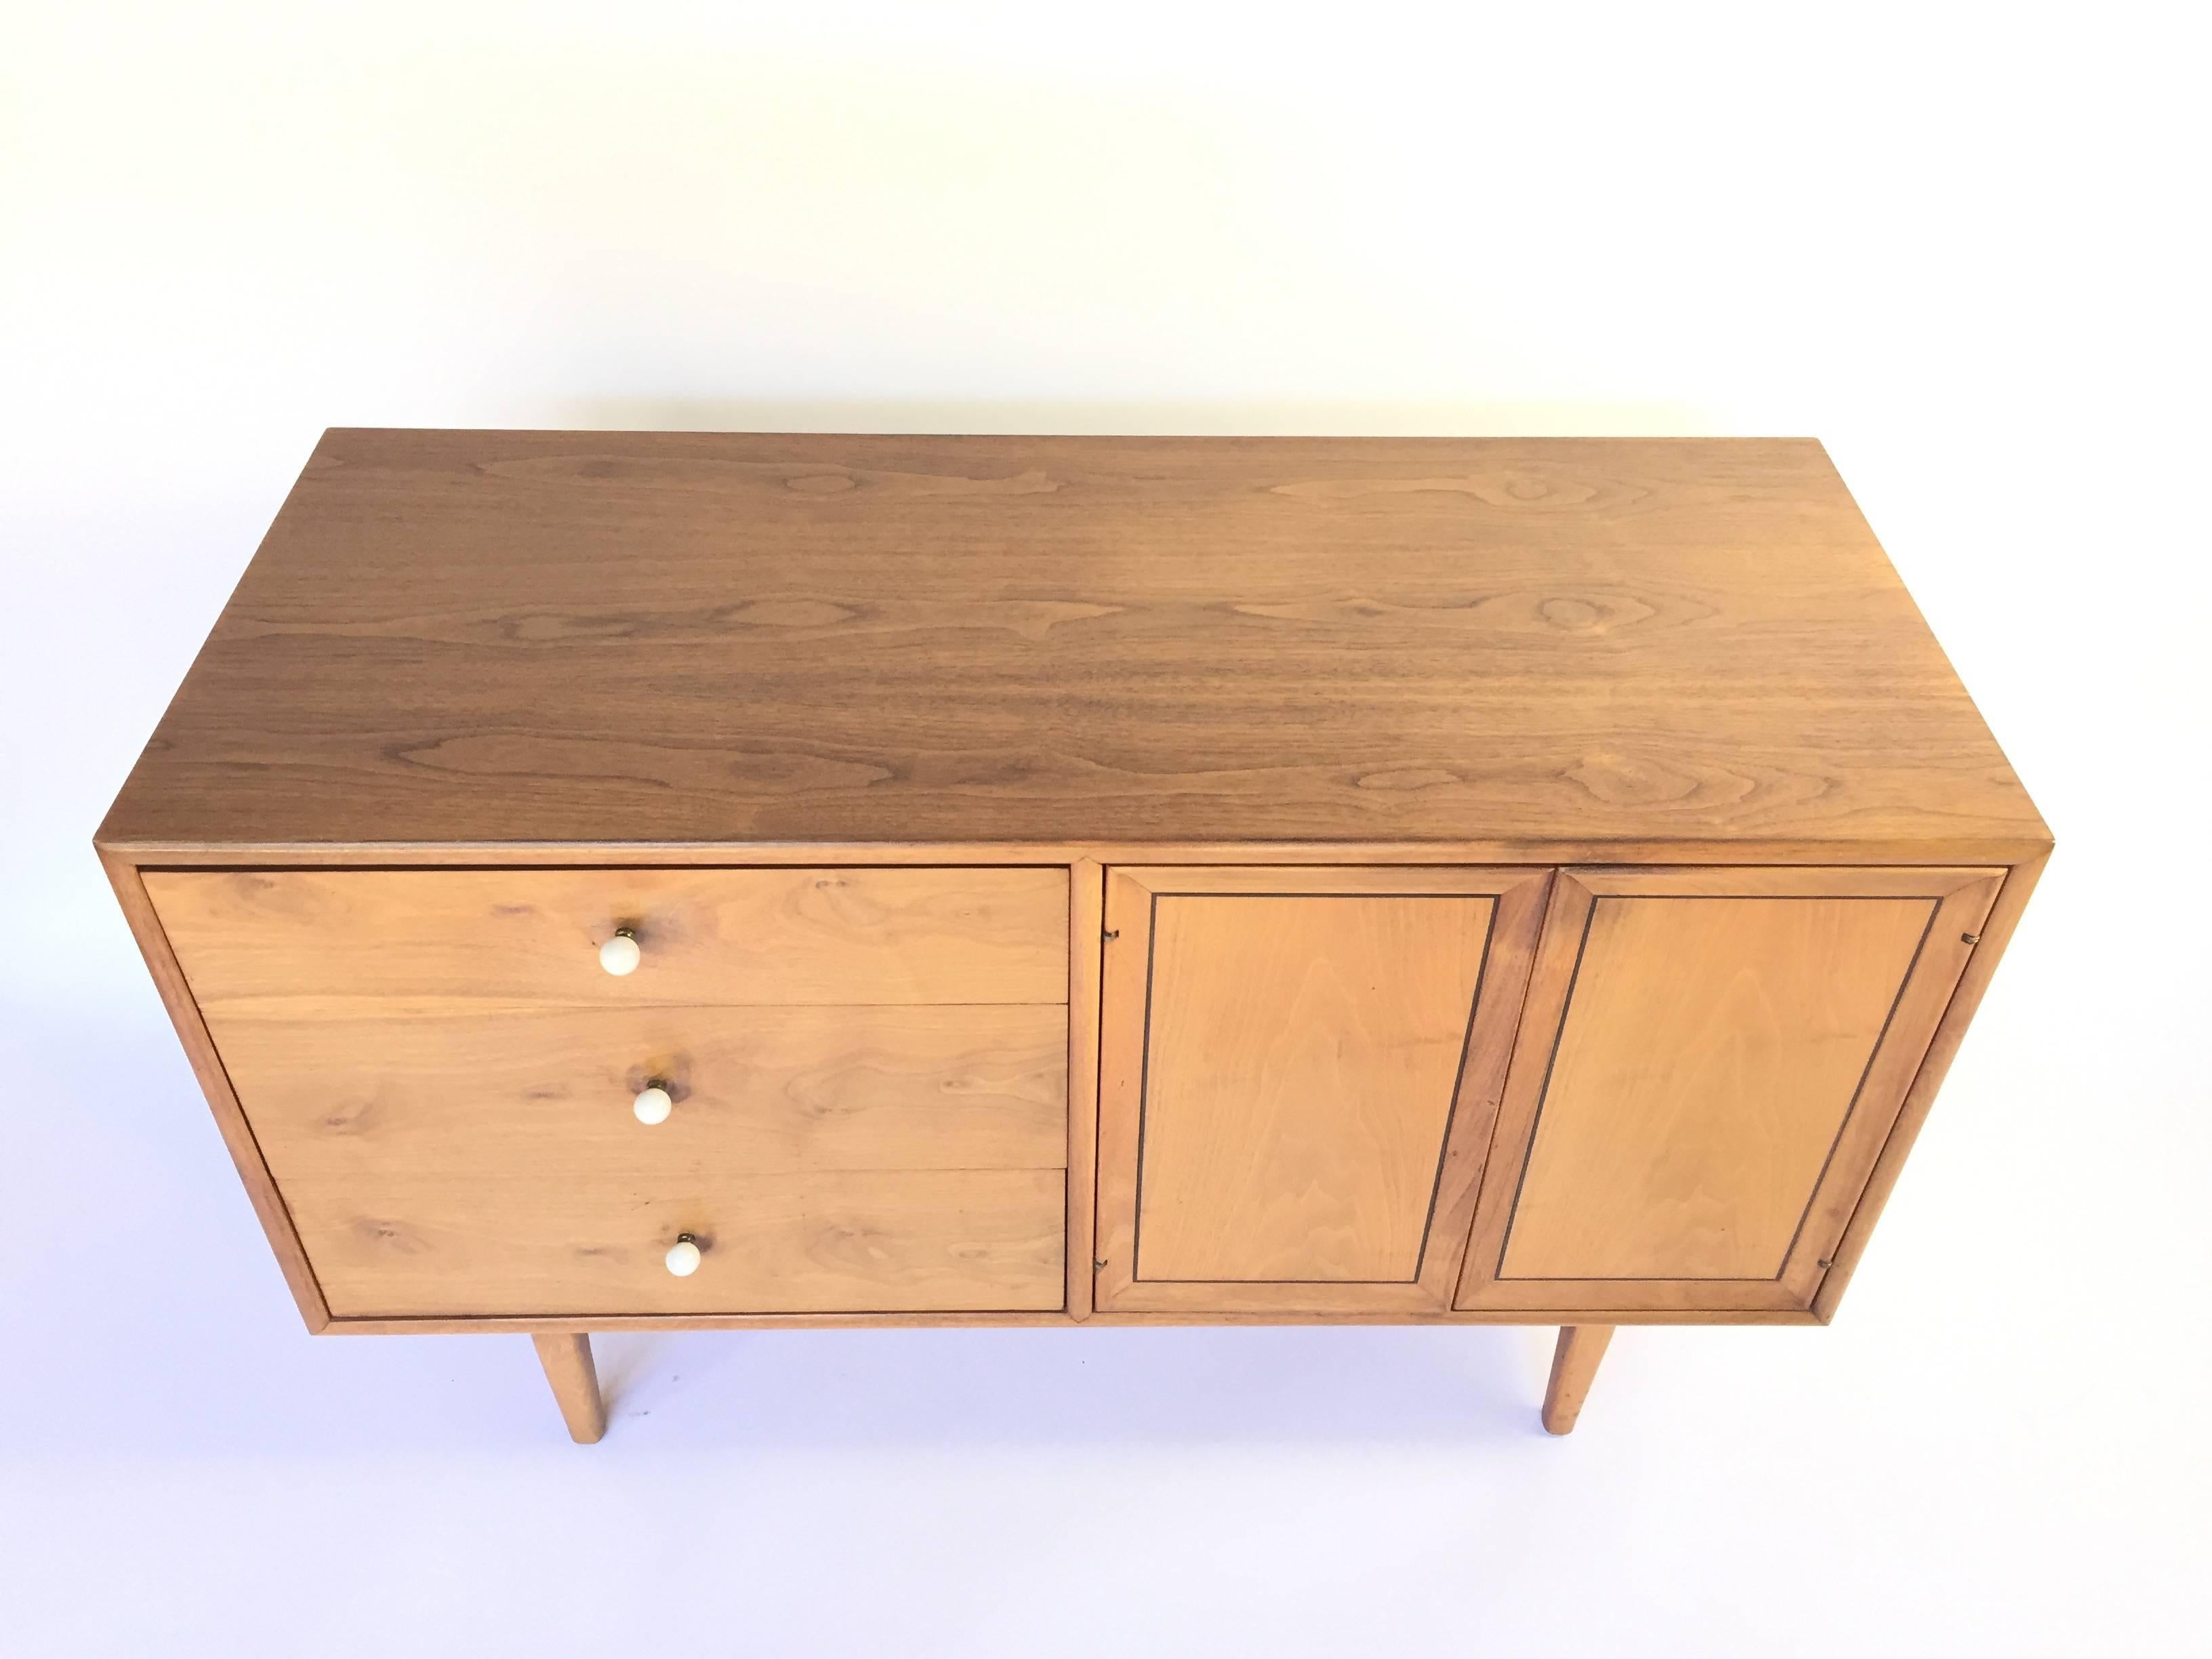 Beautiful Mid-Century Modern walnut dresser by Kipp Stewart for the Drexel Declaration collection. A timeless Mid-Century classic. Three drawers with original porcelain knobs and brass spacers. Top drawer is felt-lined and has dividers for